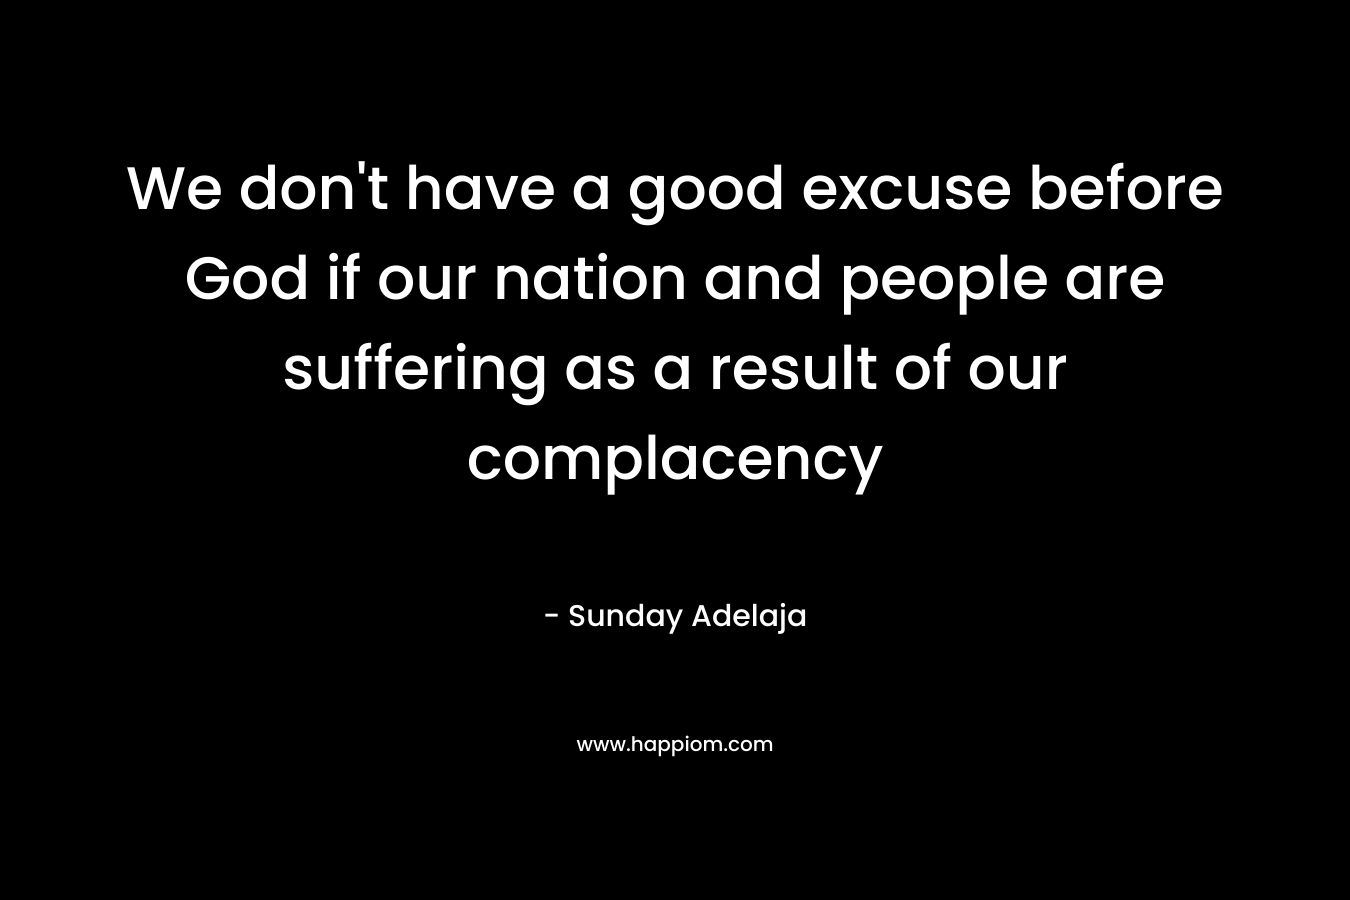 We don't have a good excuse before God if our nation and people are suffering as a result of our complacency